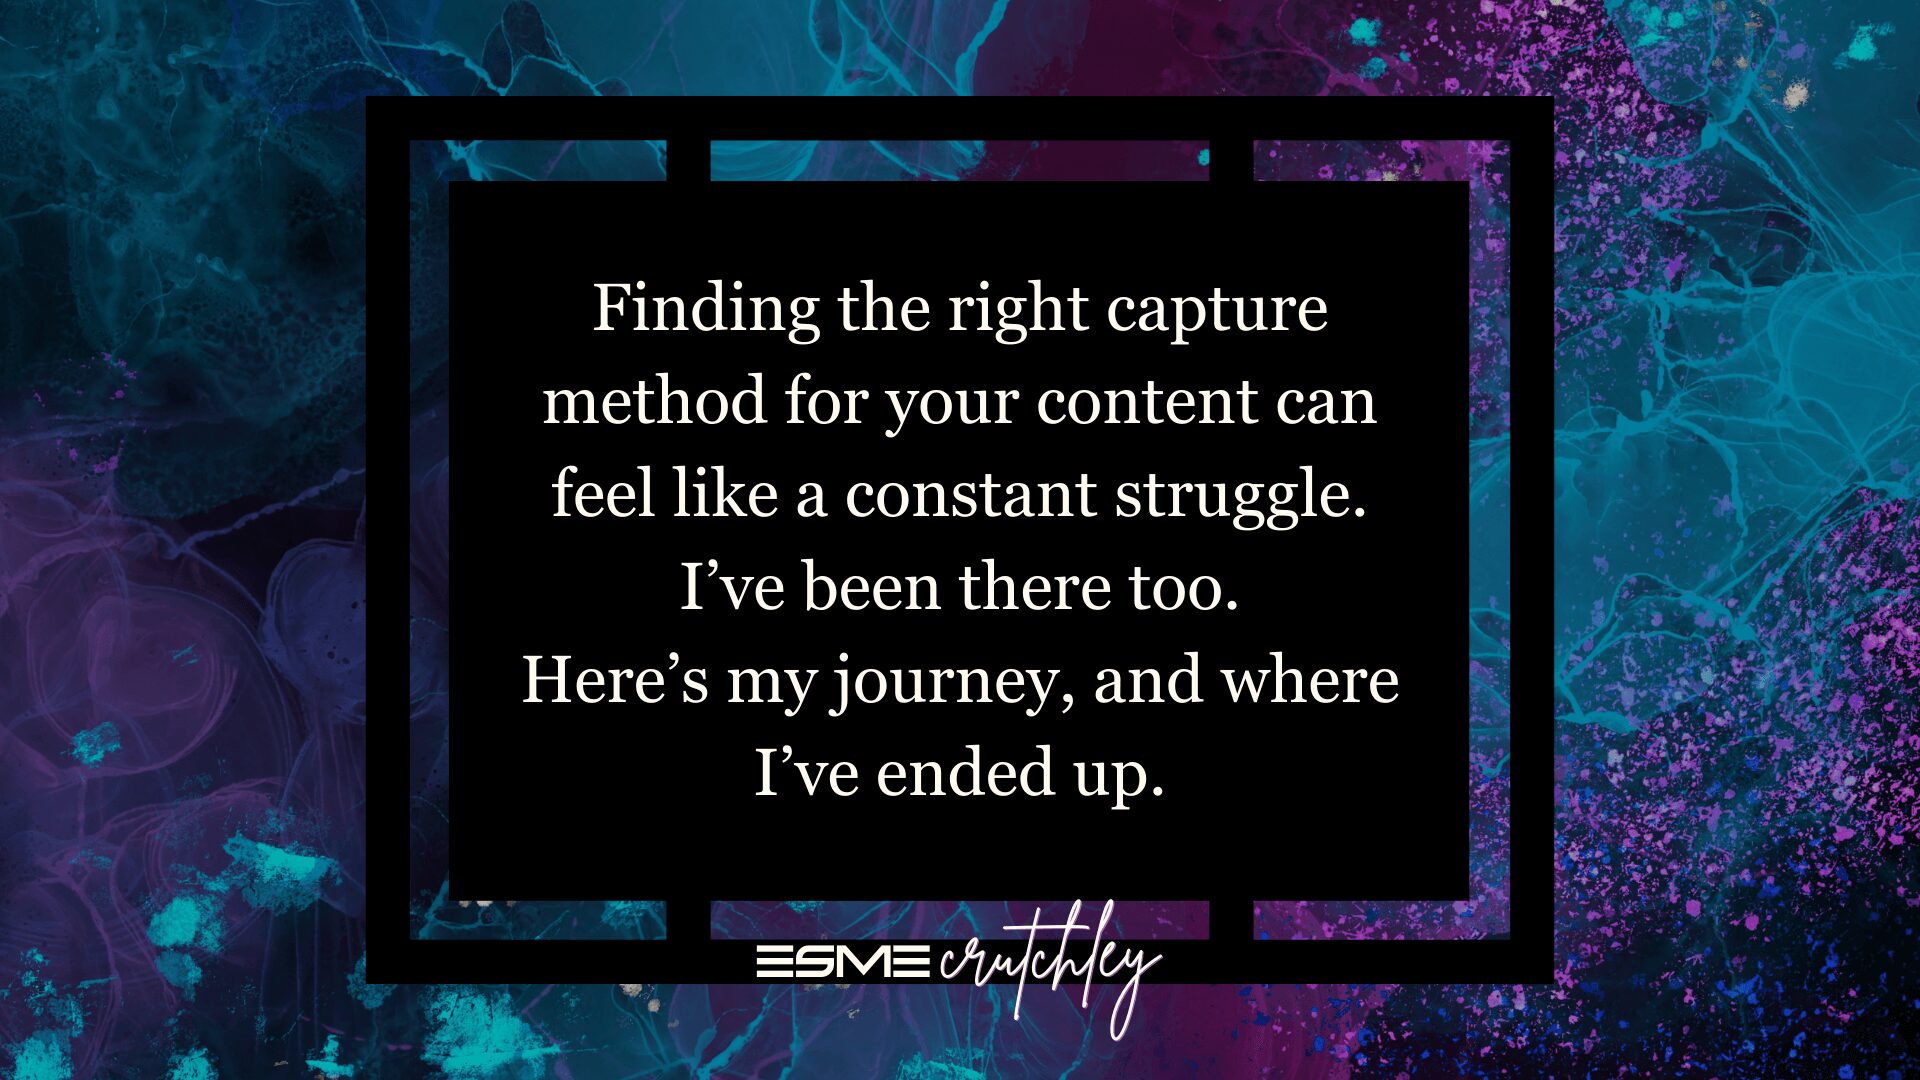 Finding the right capture method for your content can feel like a constant struggle. I've been there too. Here's my journey, and where I've ended up